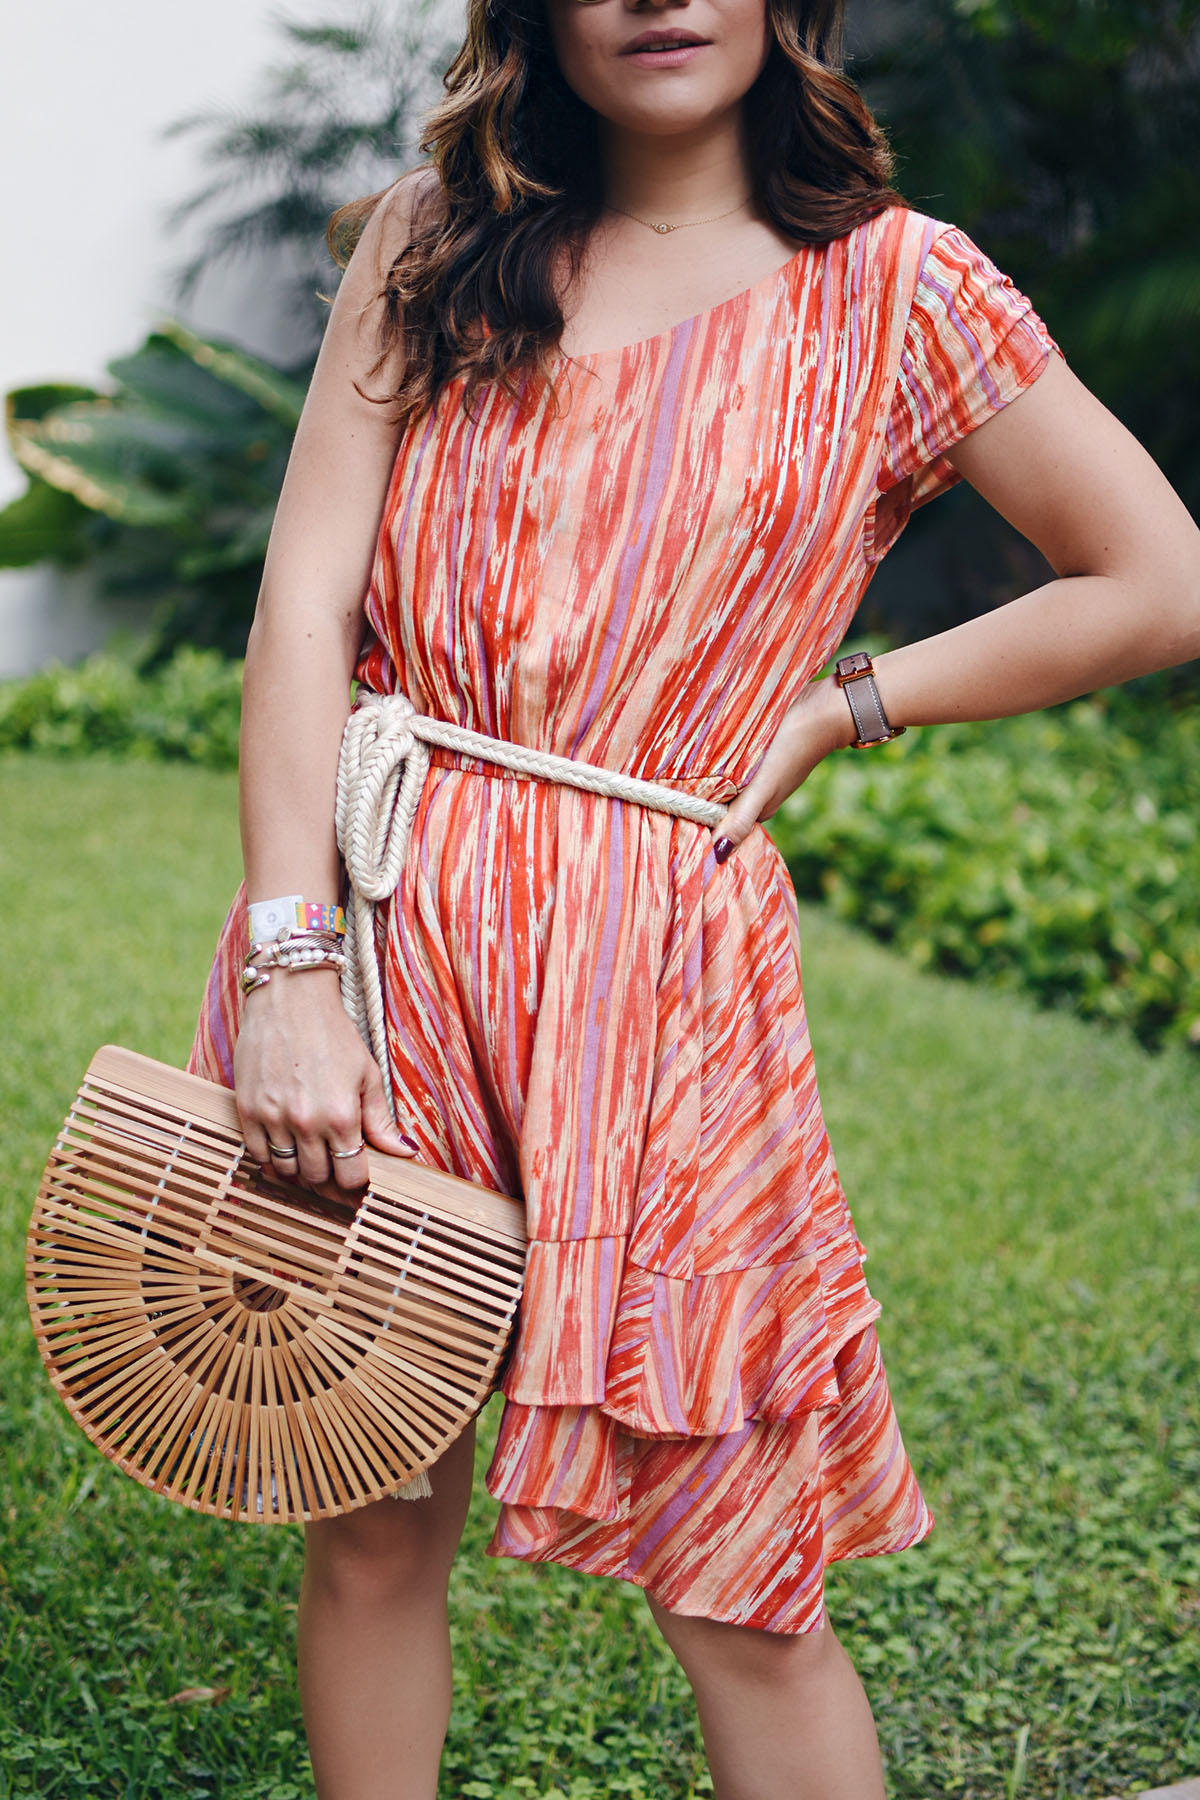 Carolina Hellal of Chic Talk wearing a Free People mini dress, Cultagaia ark bag , Rebecca Minkoff lace up sandals and Rayban sunglasses in Mexico. 